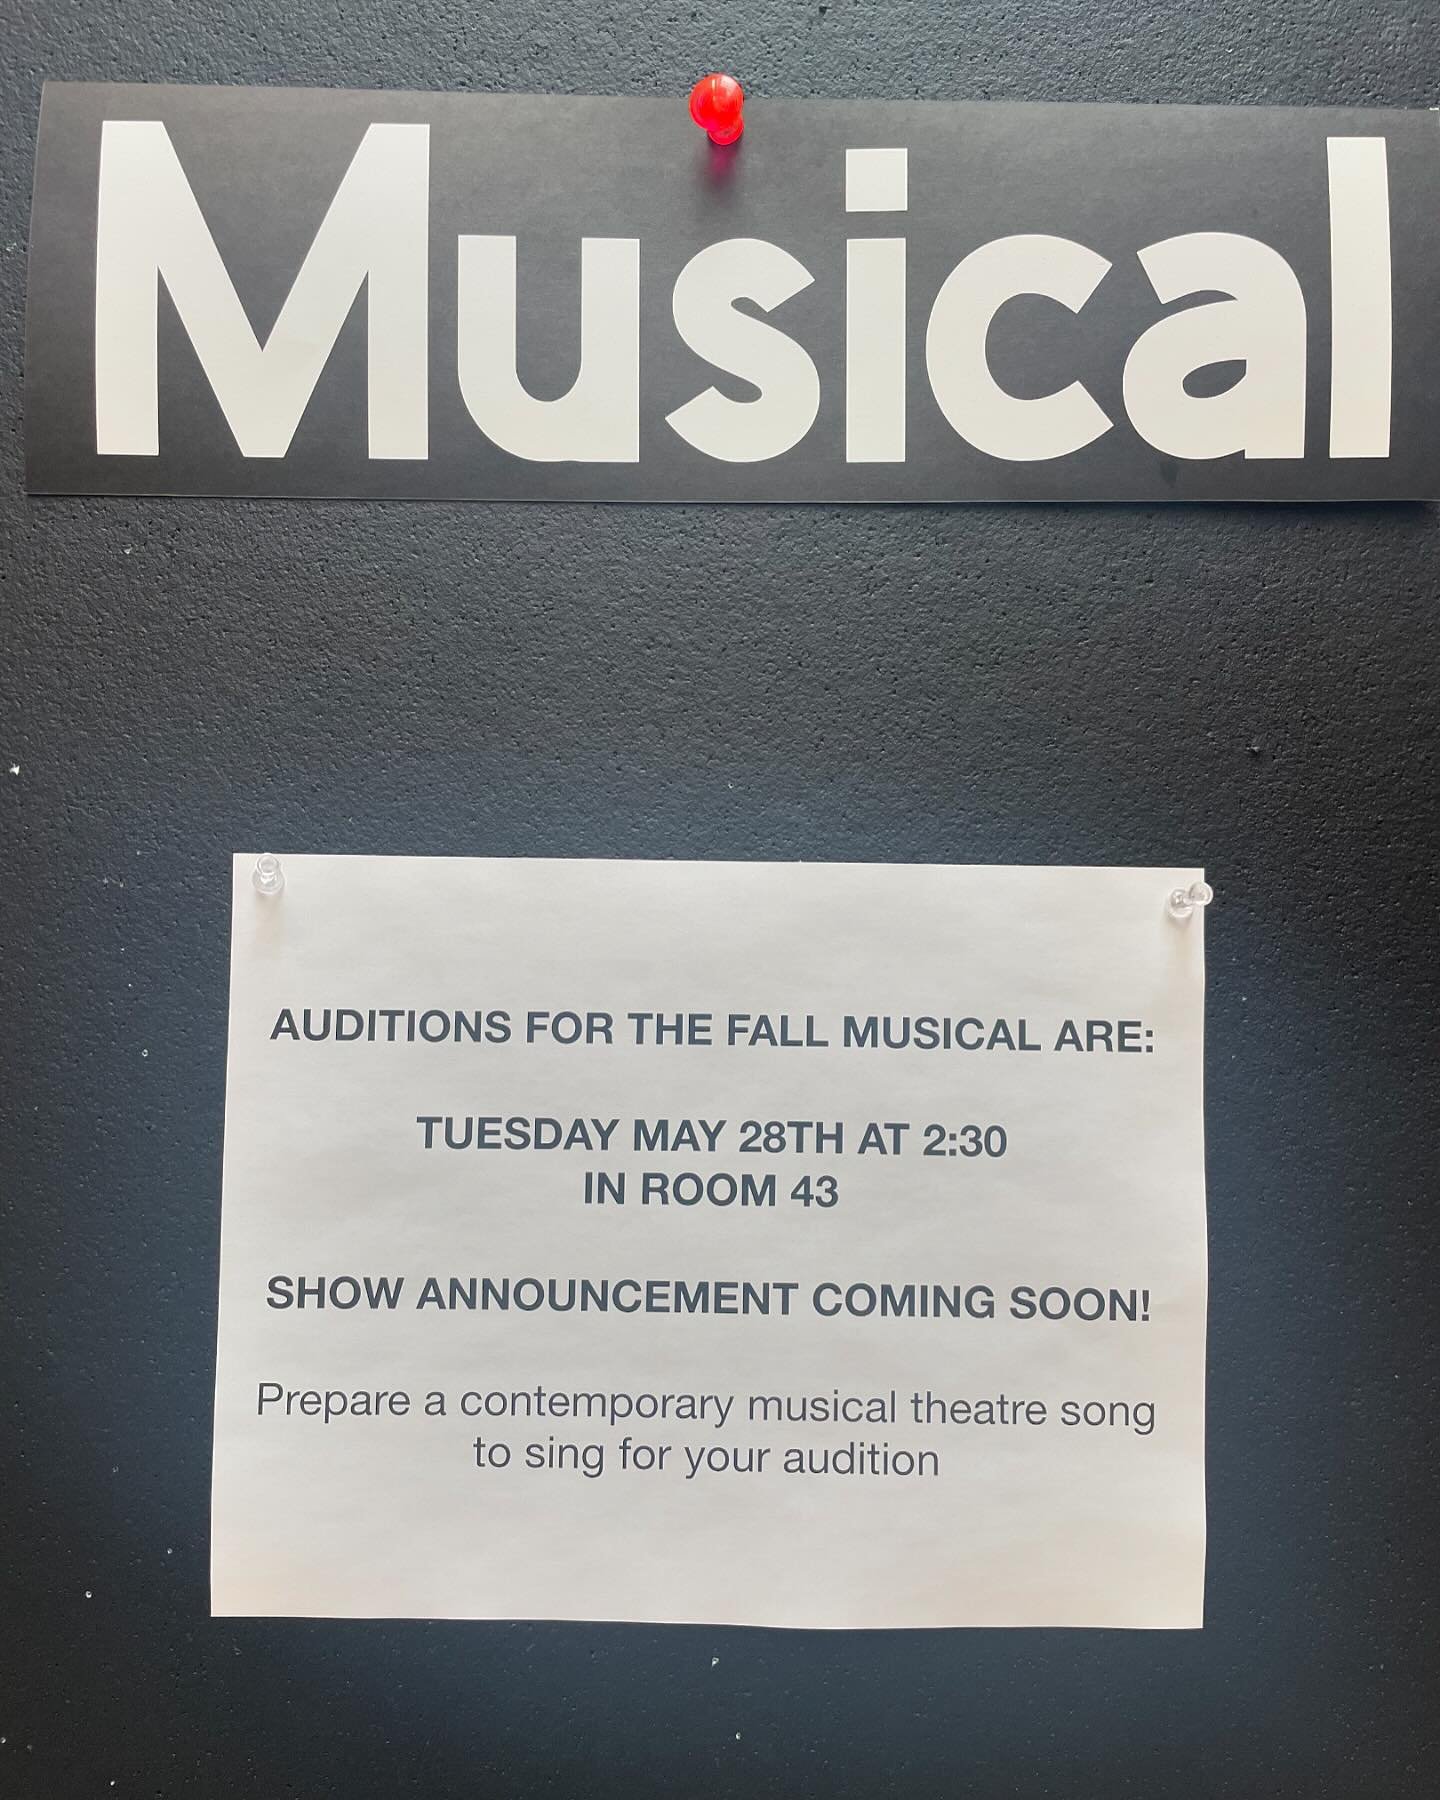 The wait is over! Fall Musical auditions are Tuesday May 28th. Make sure to prepare a contemporary musical theatre audition song! Musical announcement coming soon&hellip;